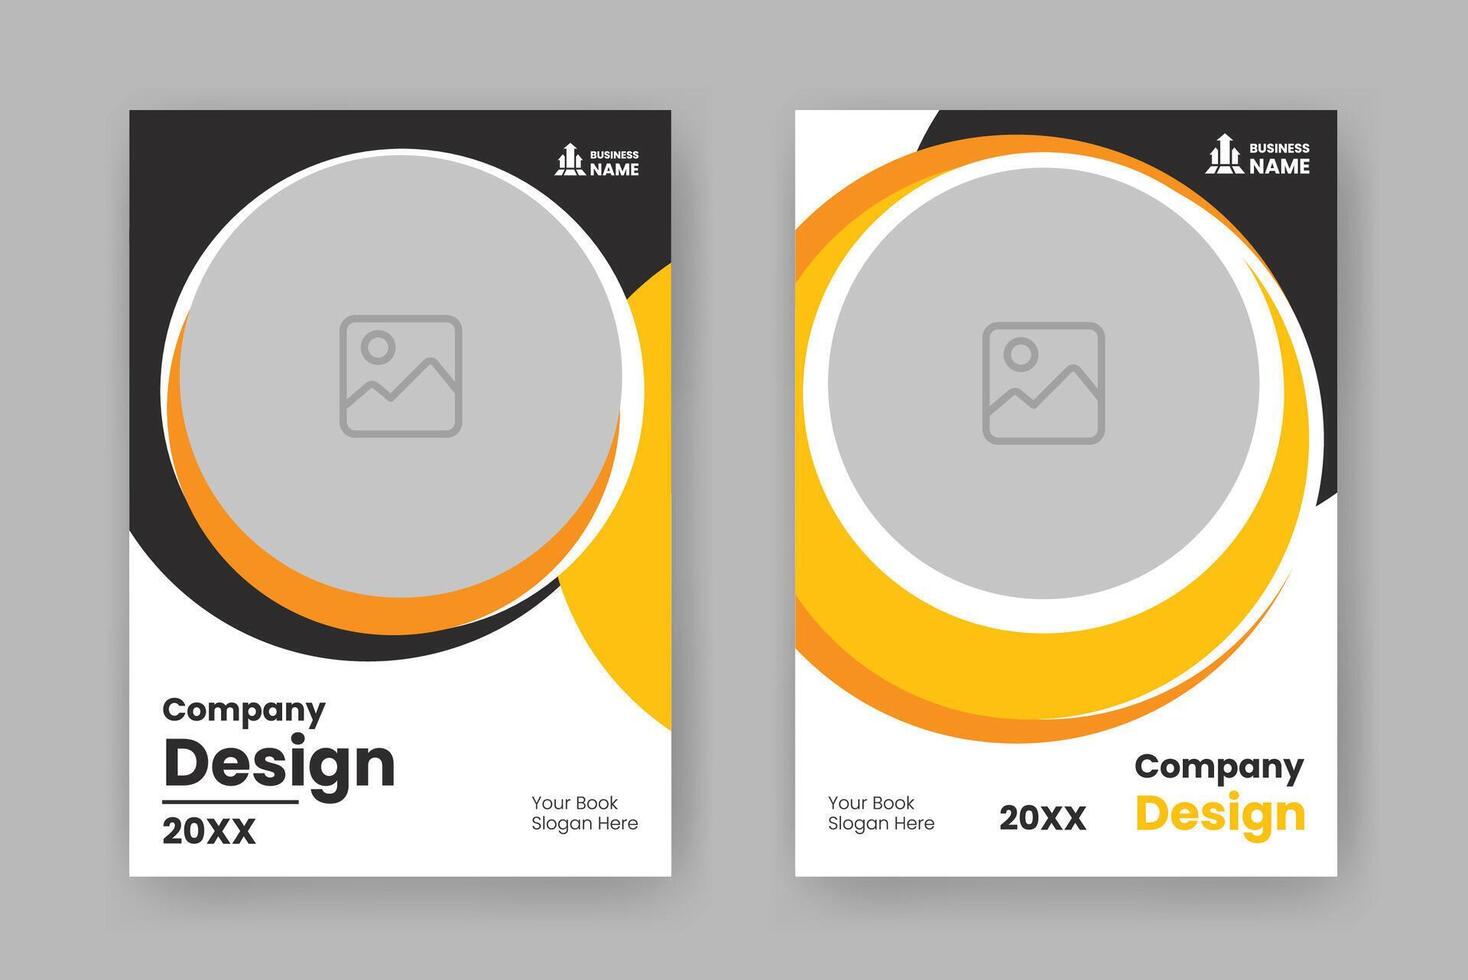 Modern Yellow  Ebook Cover Template in A4. Abstract  Shapes Cover Design Suitable for Document, Brochure, Annual Report, Magazine, Corporate Business, Company Portfolio, Flayer, Website, etc. vector